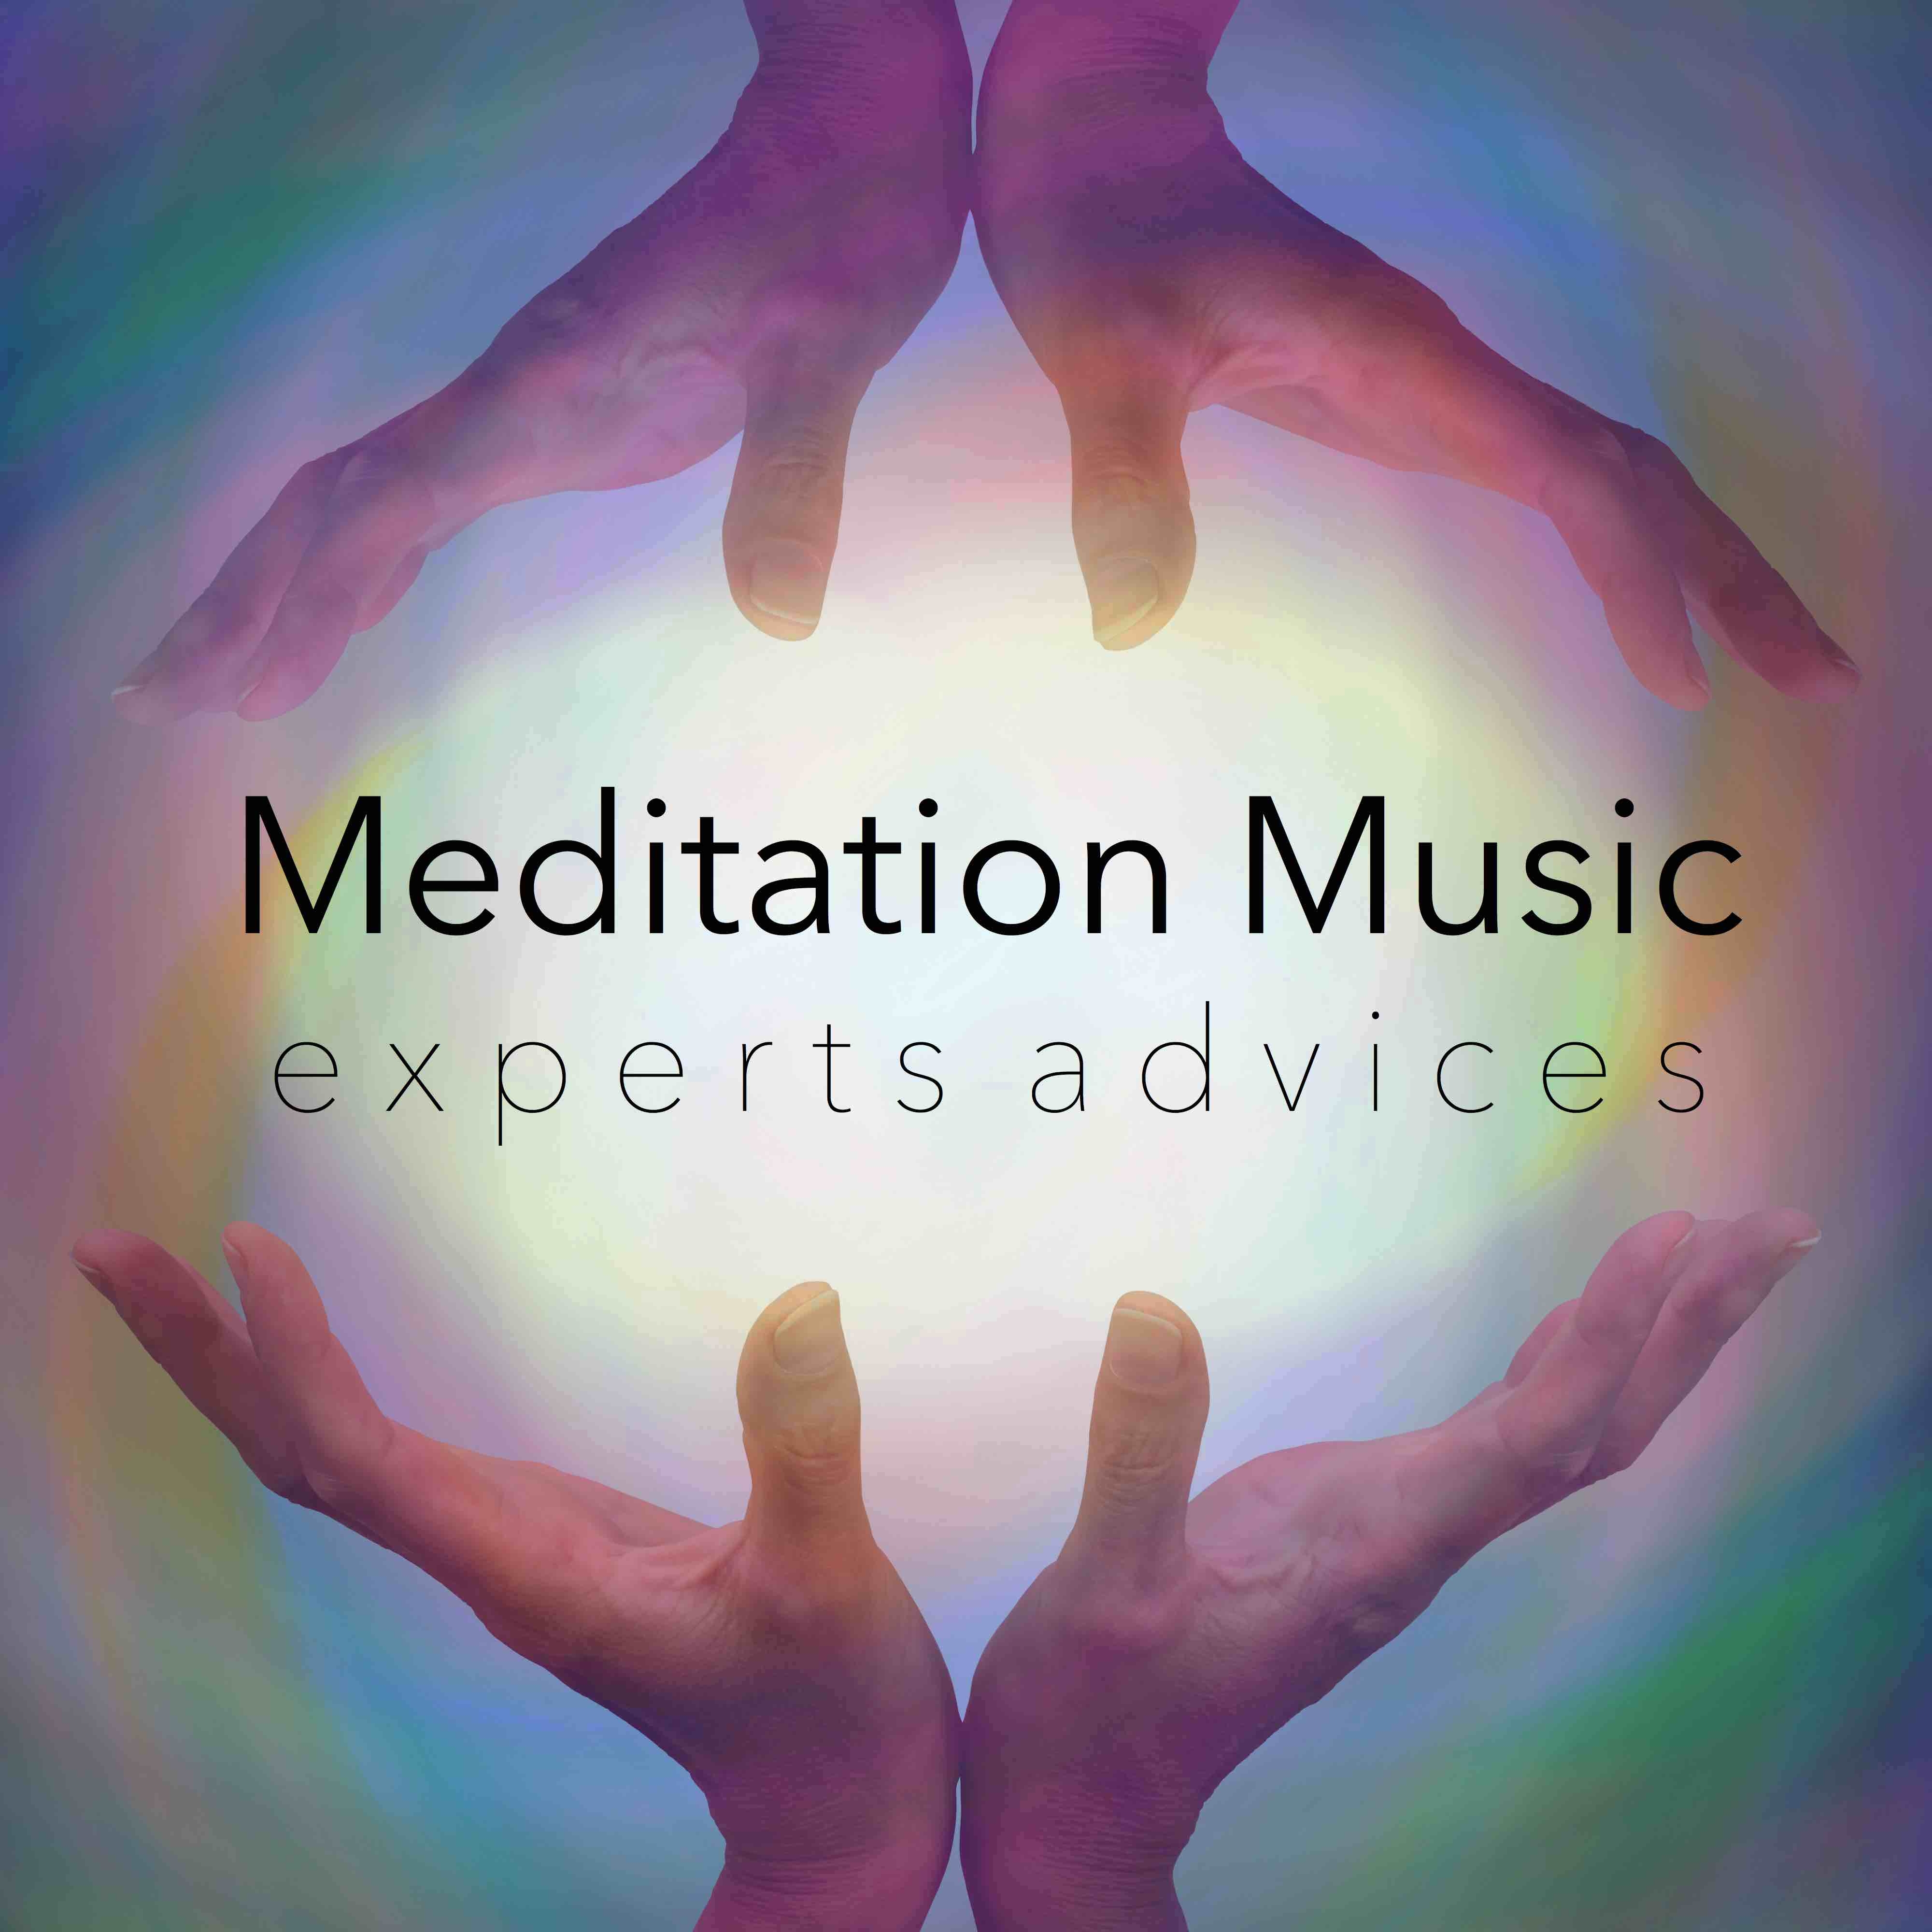 Meditation Music Experts Advices: Healing Secrets Revealed in Chakra Music and Relaxation Techniques Meditation Music Experts Advices: Healing Secrets Revealed in Chakra Music and Relaxation Techniques